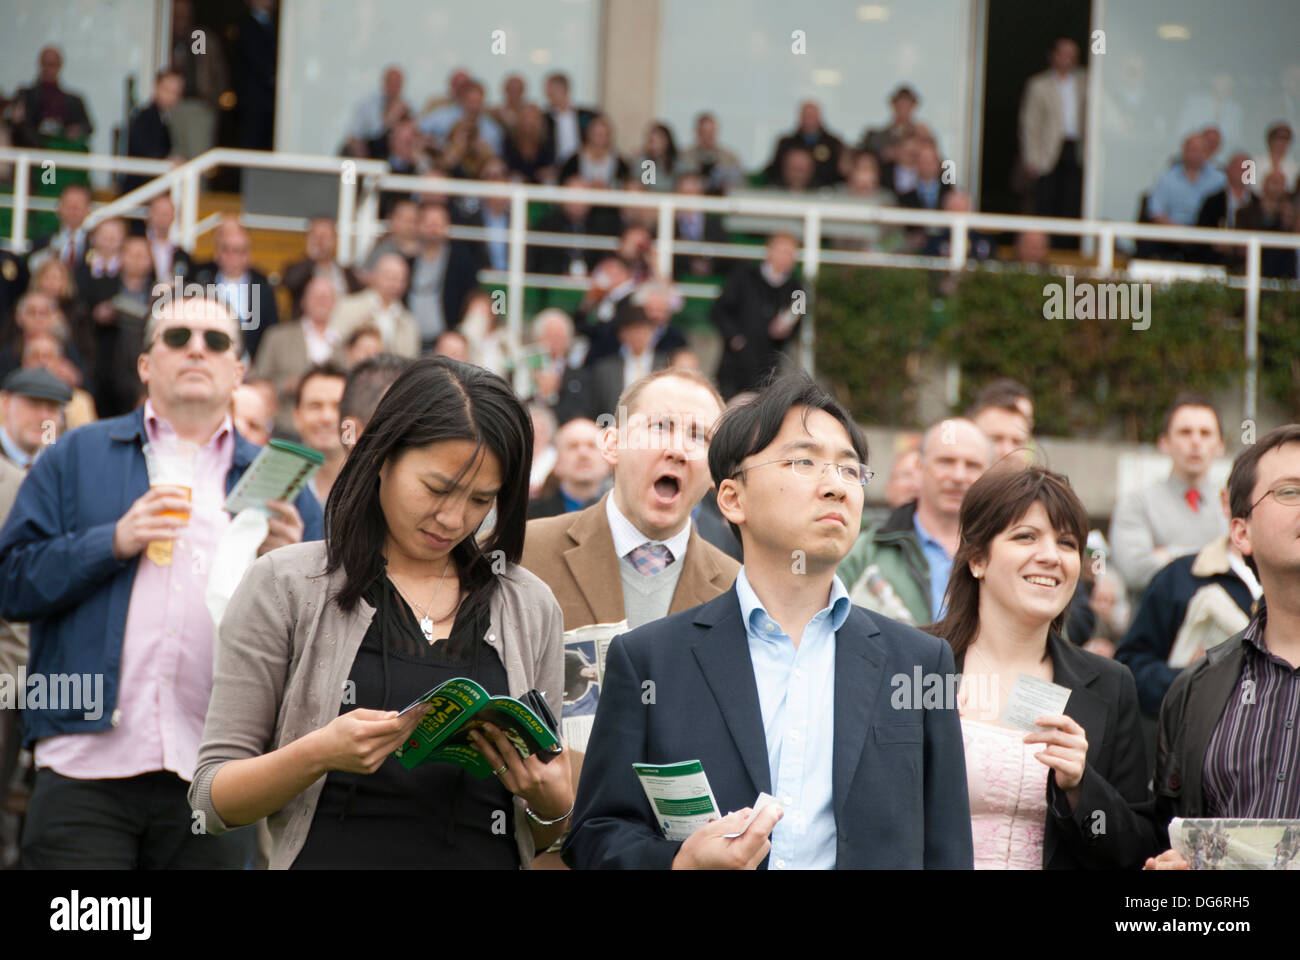 Group of people watching horse race Stock Photo